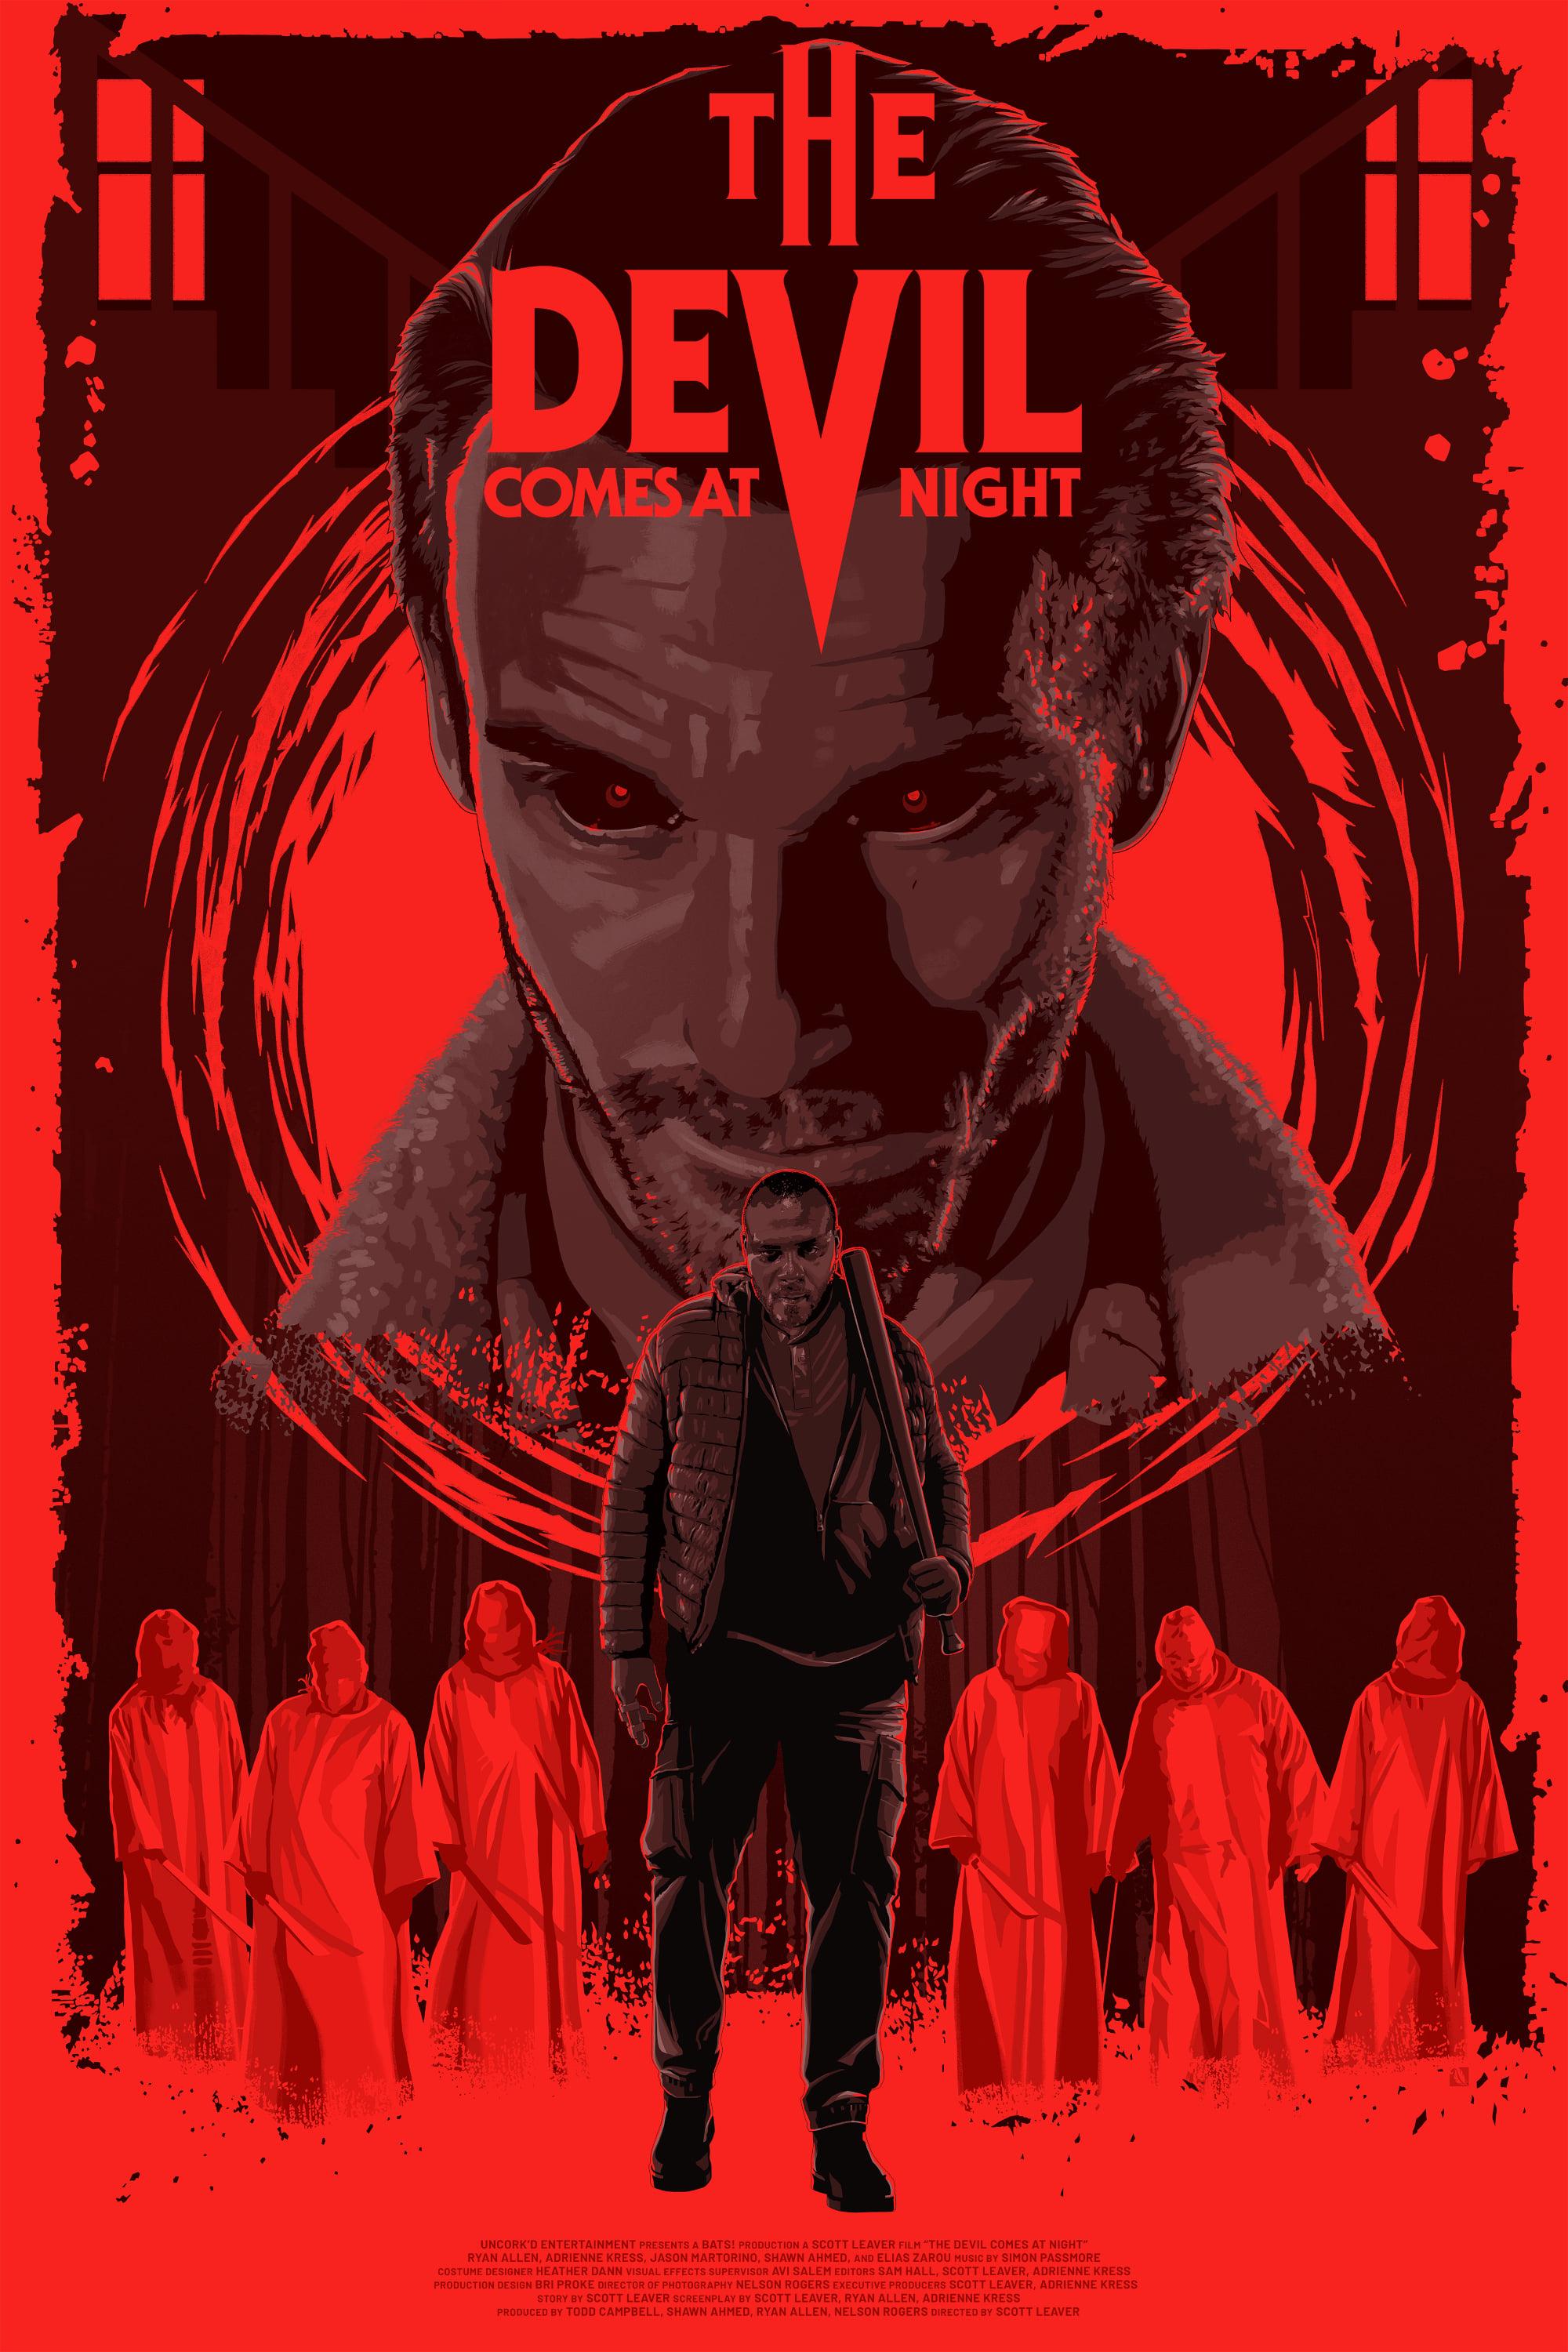 The Devil Comes at Night poster